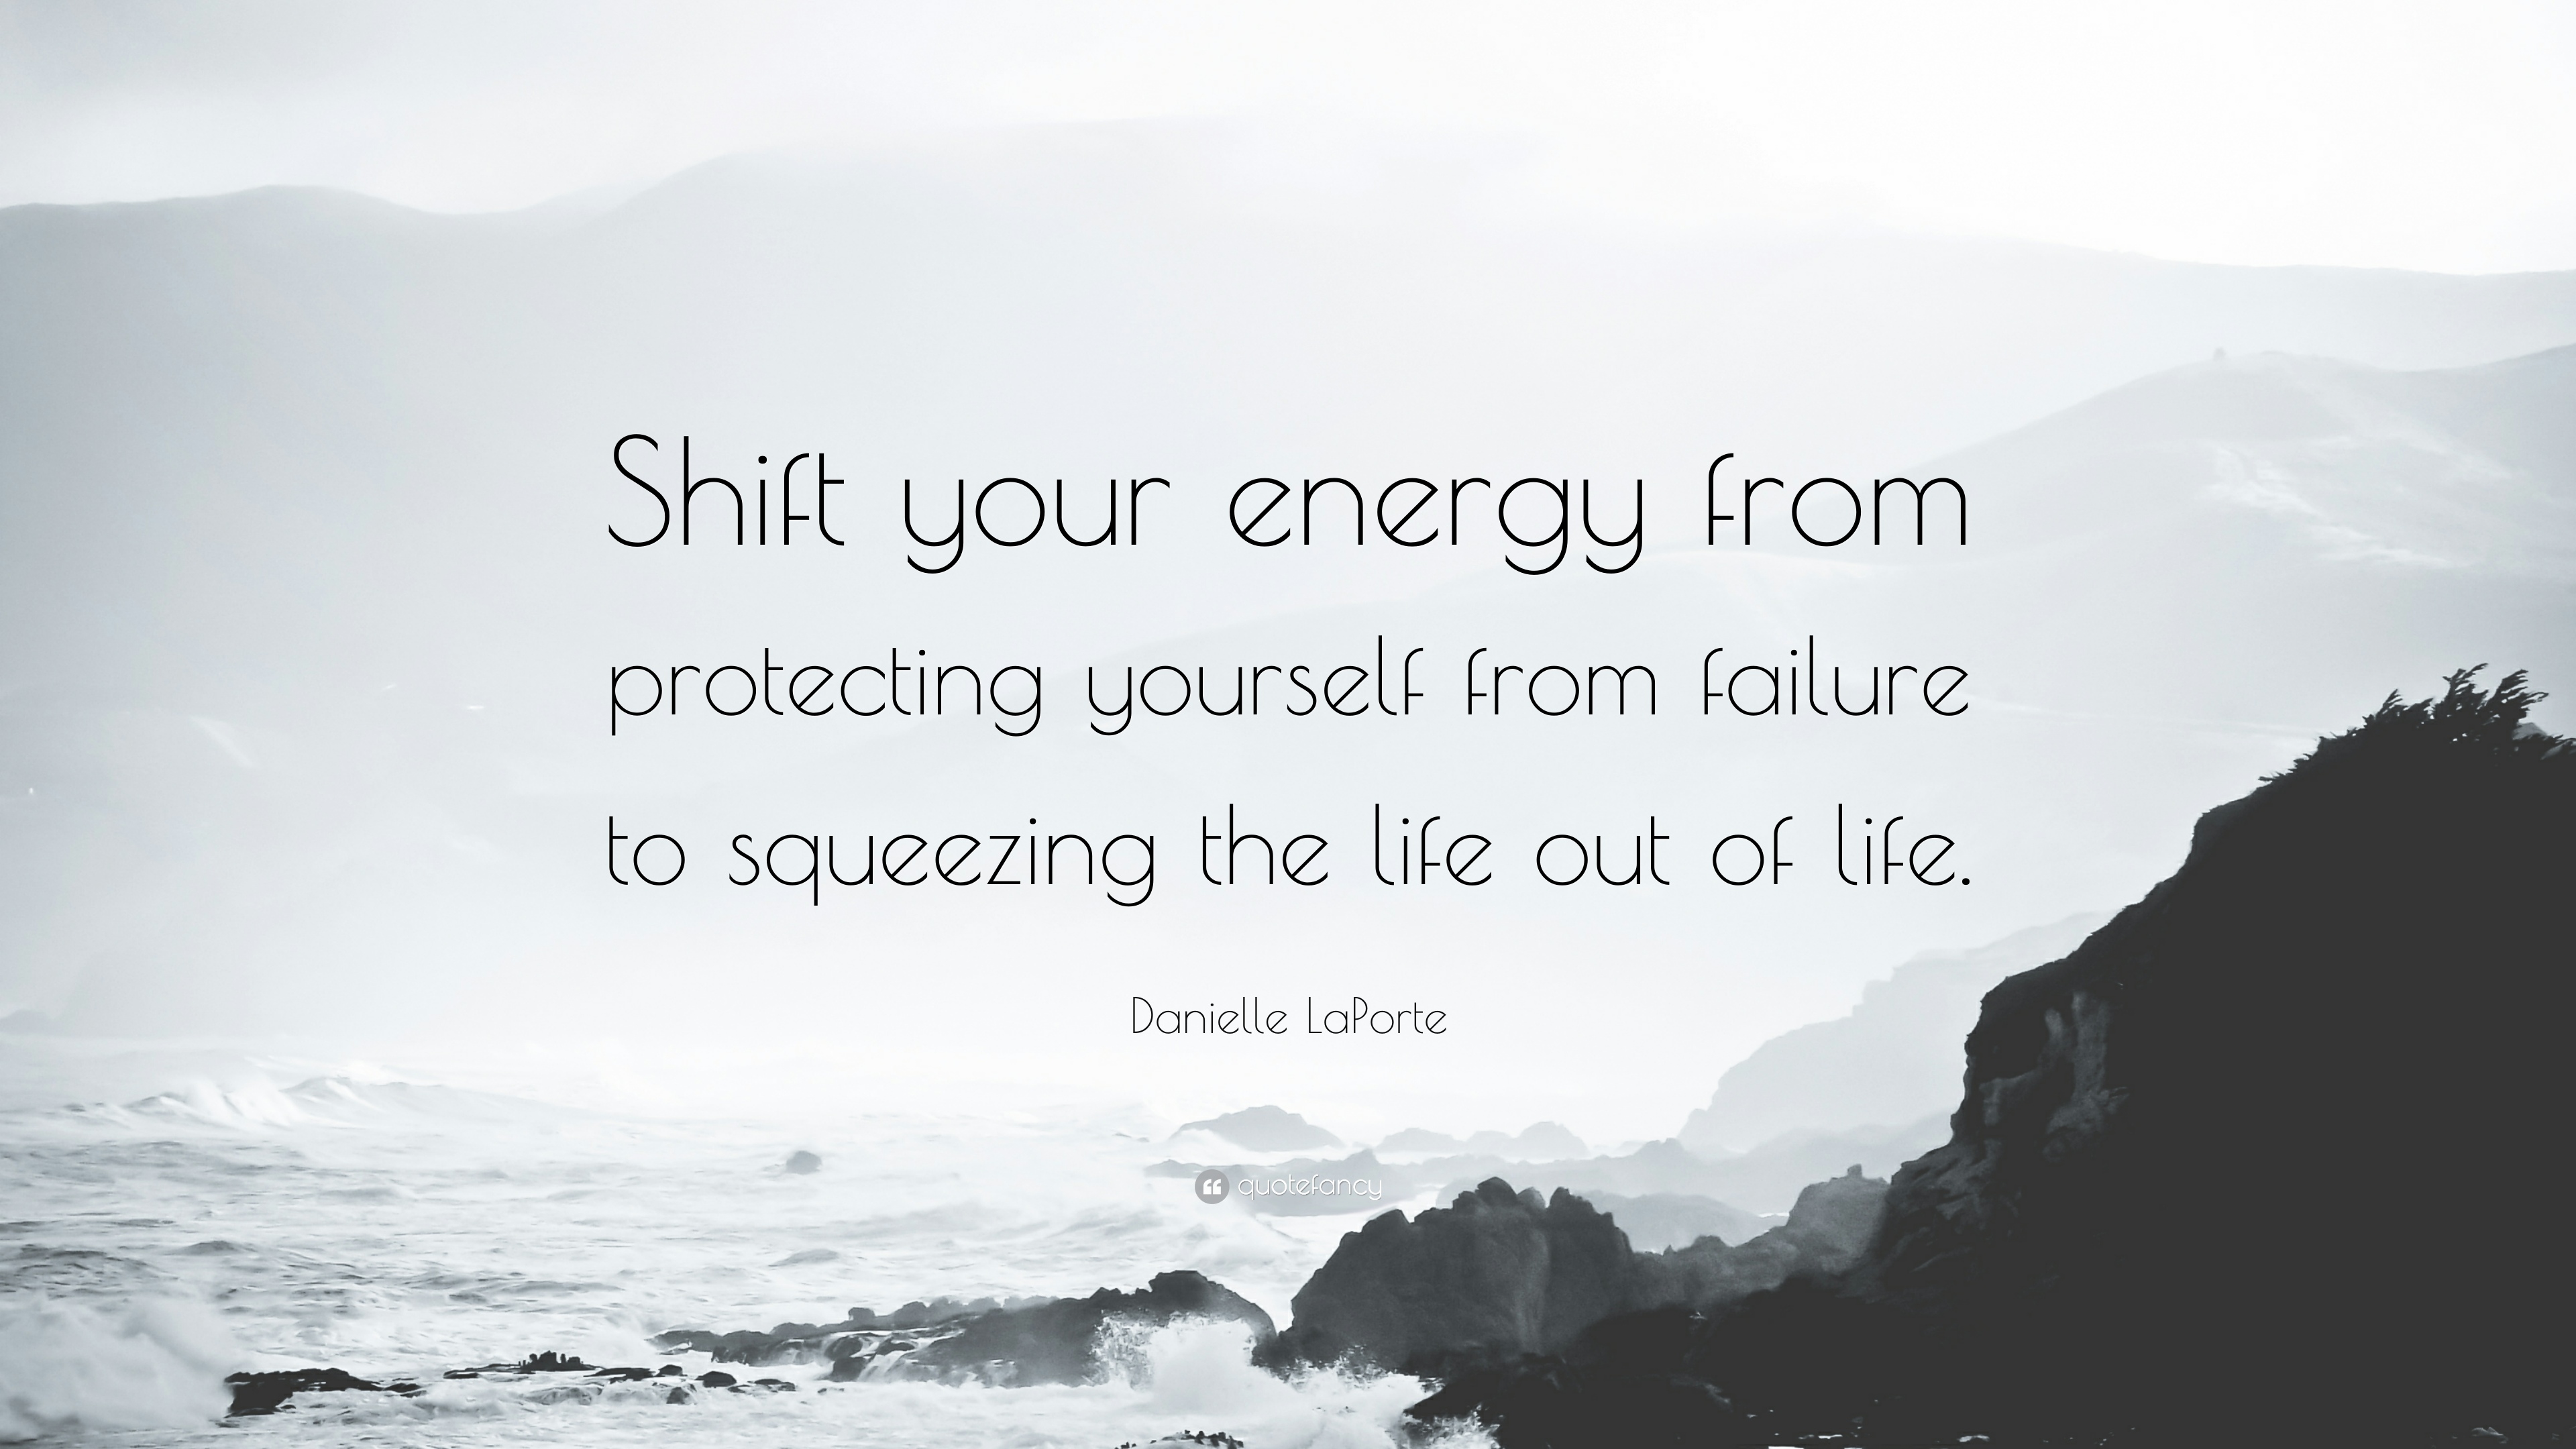 Danielle LaPorte Quote: “Shift your energy from protecting yourself ...